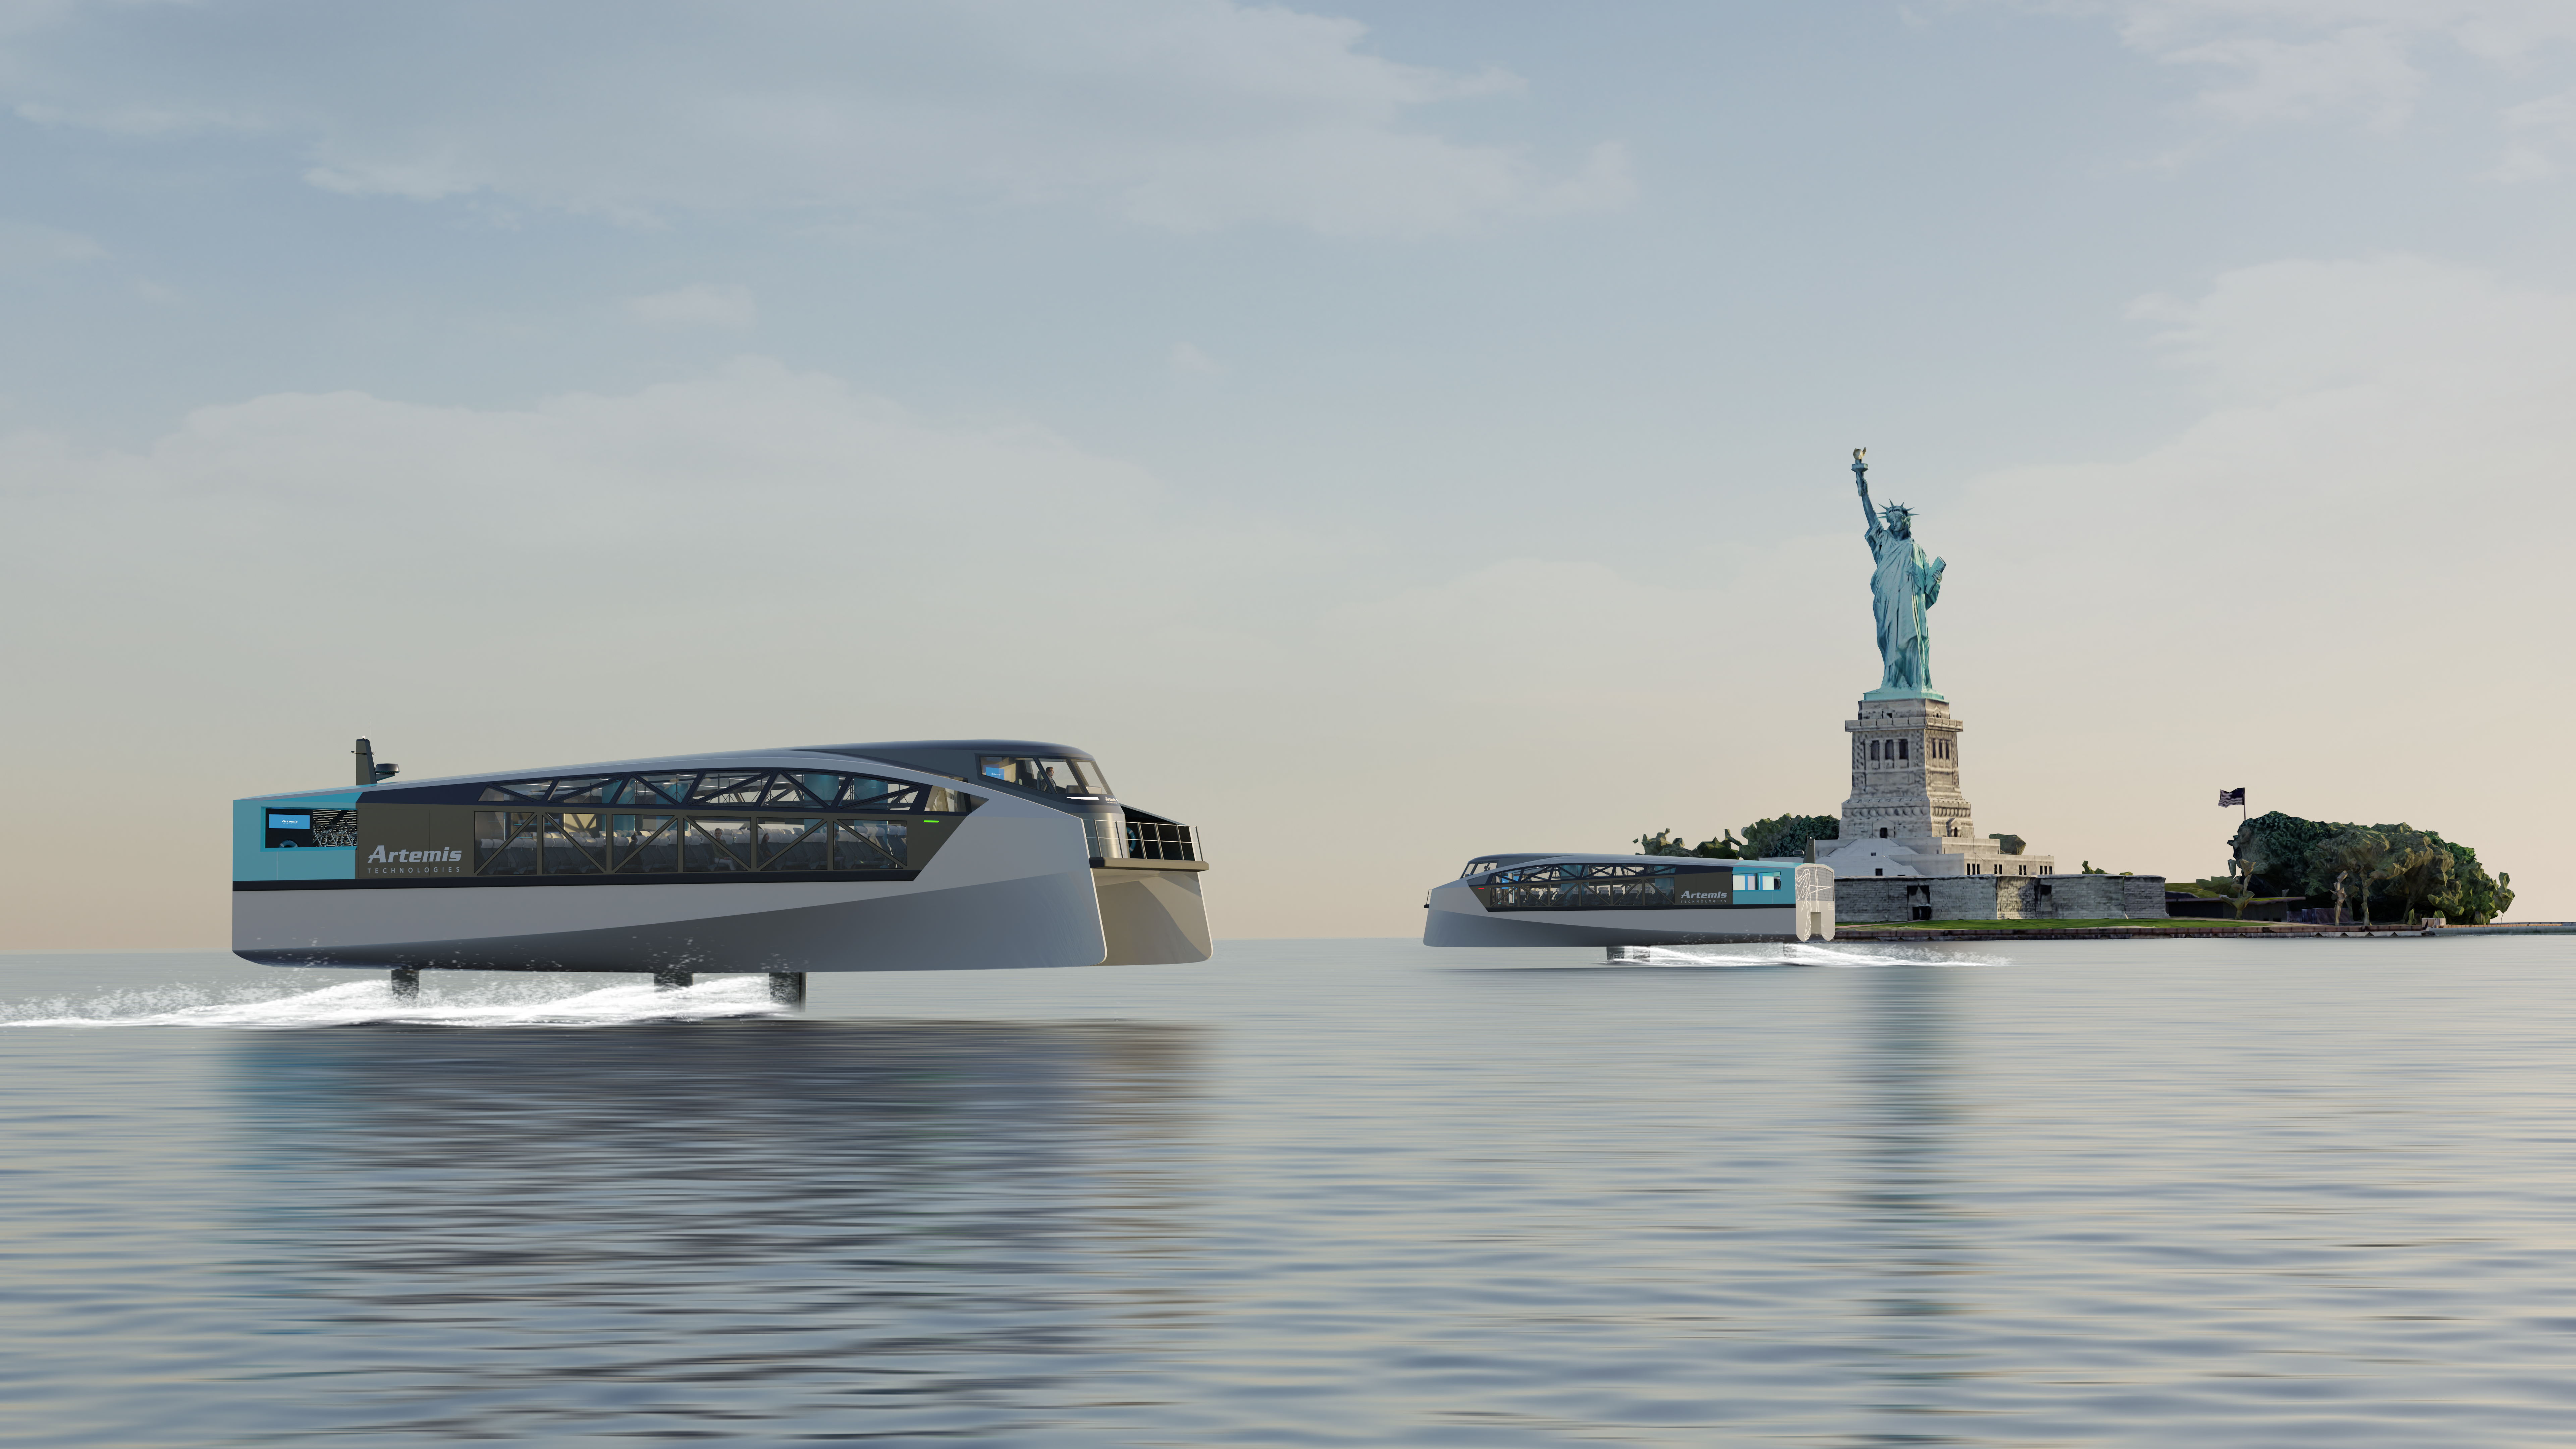 Two passenger ferries foiling above the water with the Statue of Liberty in the background